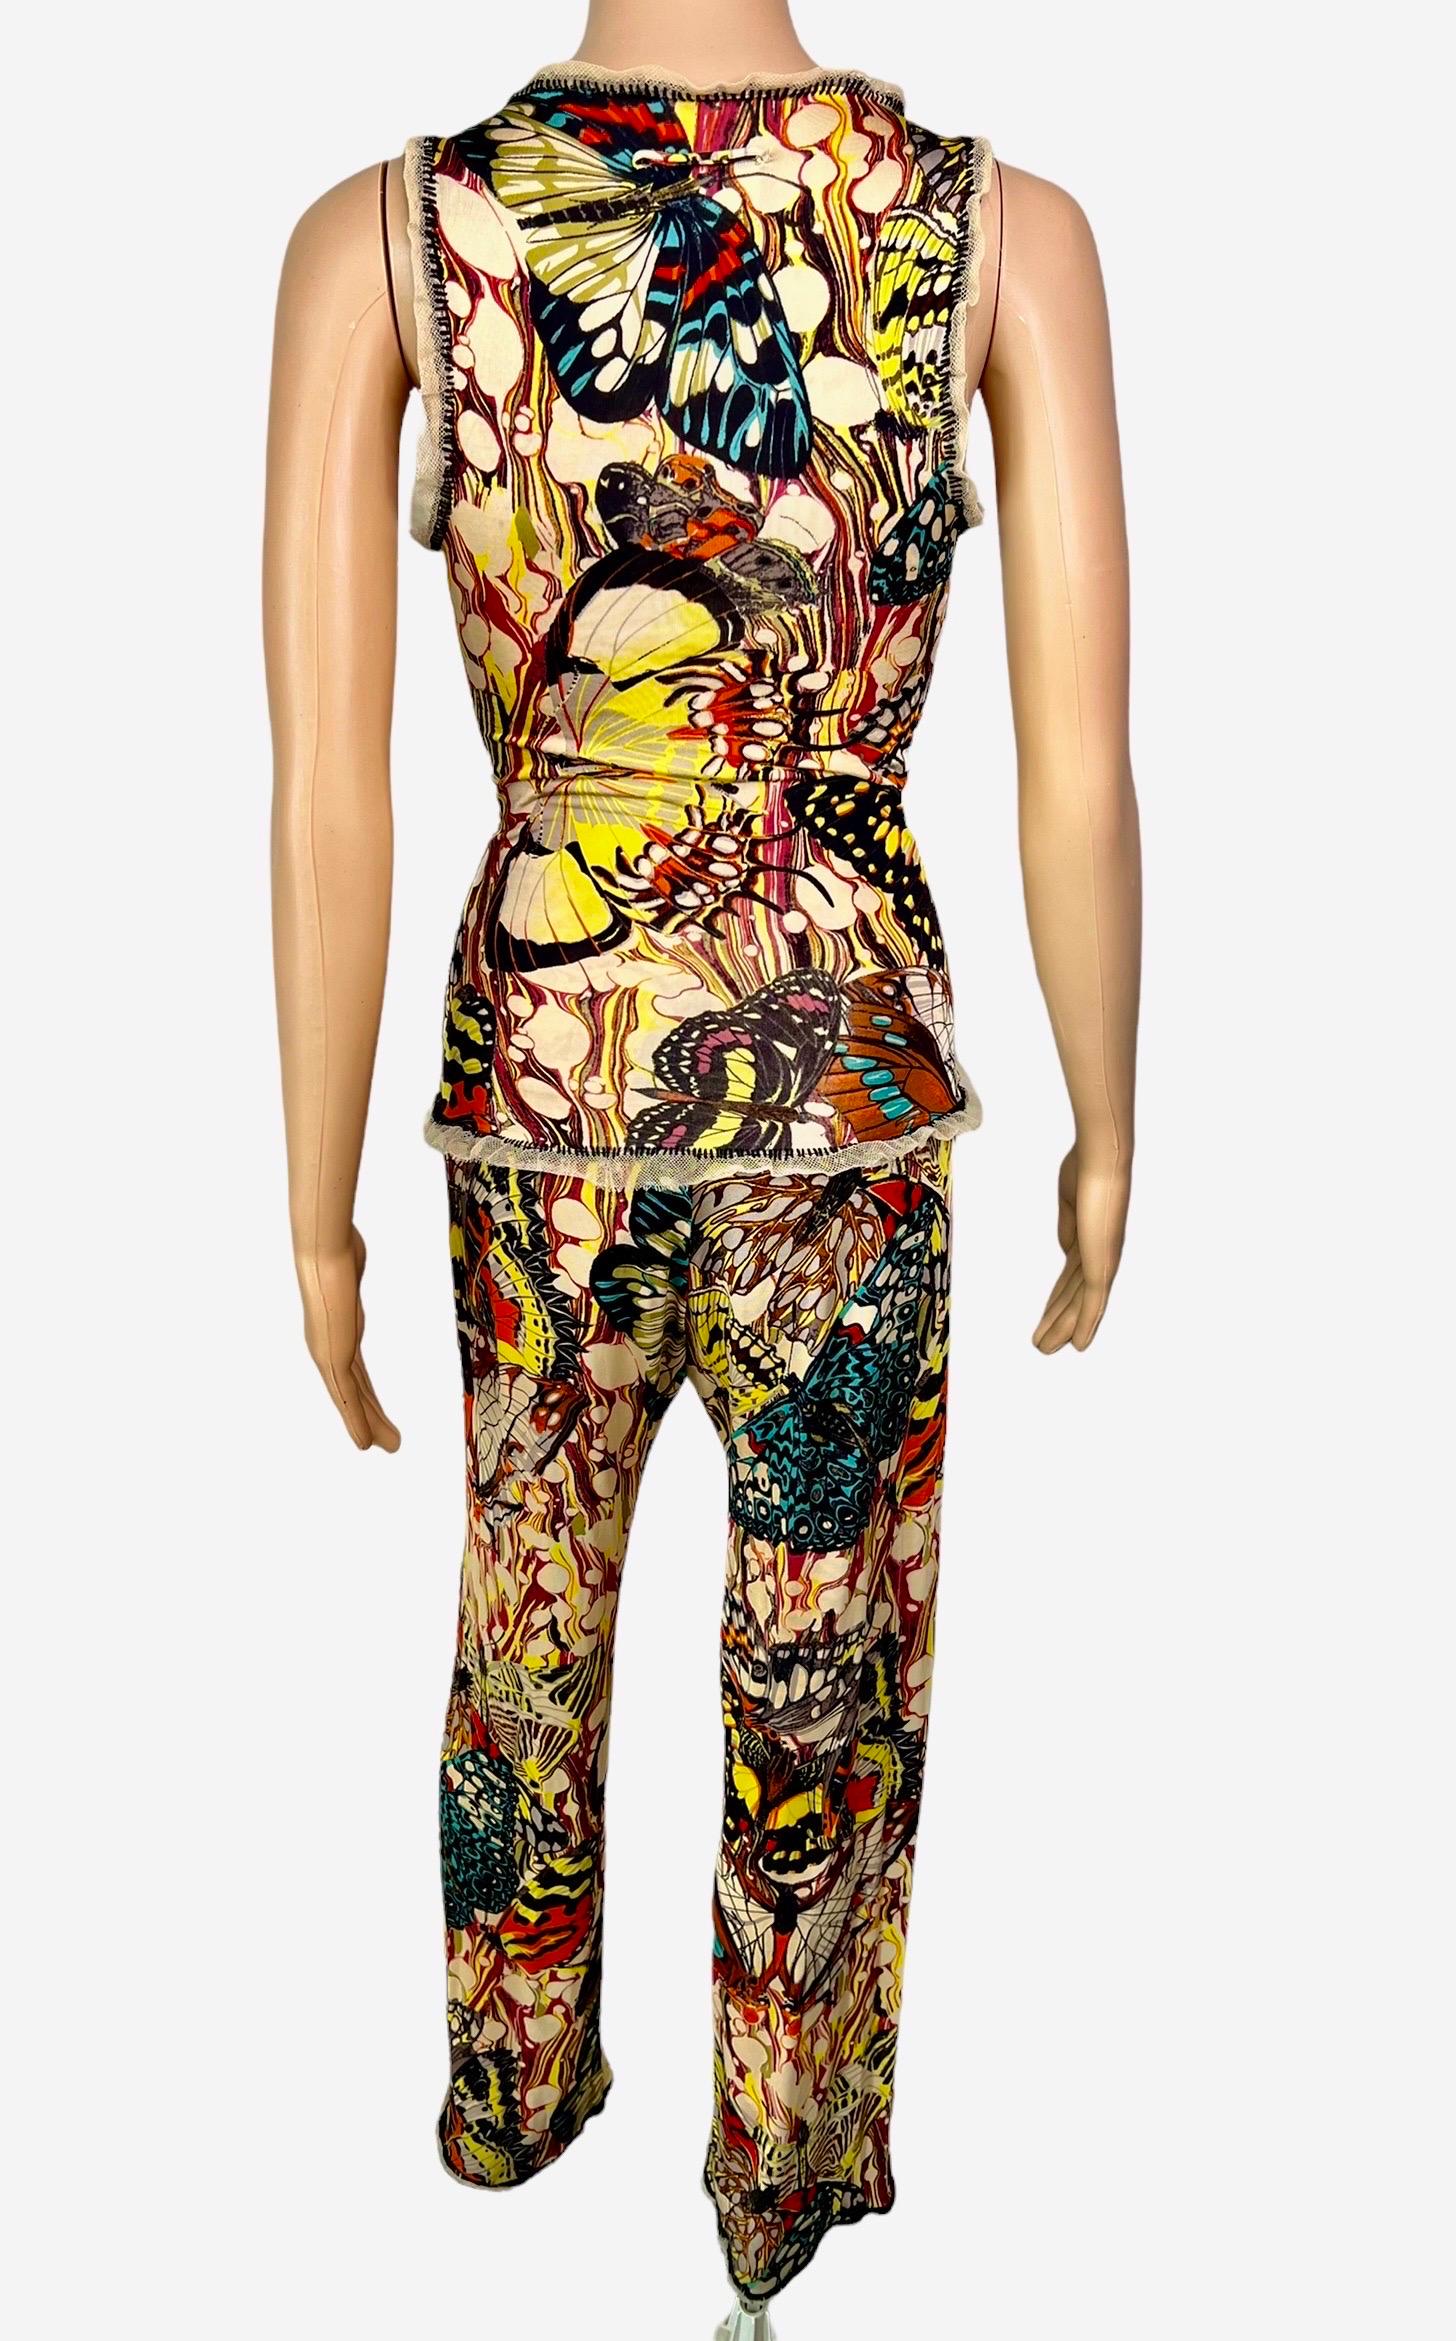 Jean Paul Gaultier S/S 2003 Butterfly Print Top & Pants Ensemble 2 Piece Set  In Good Condition For Sale In Naples, FL